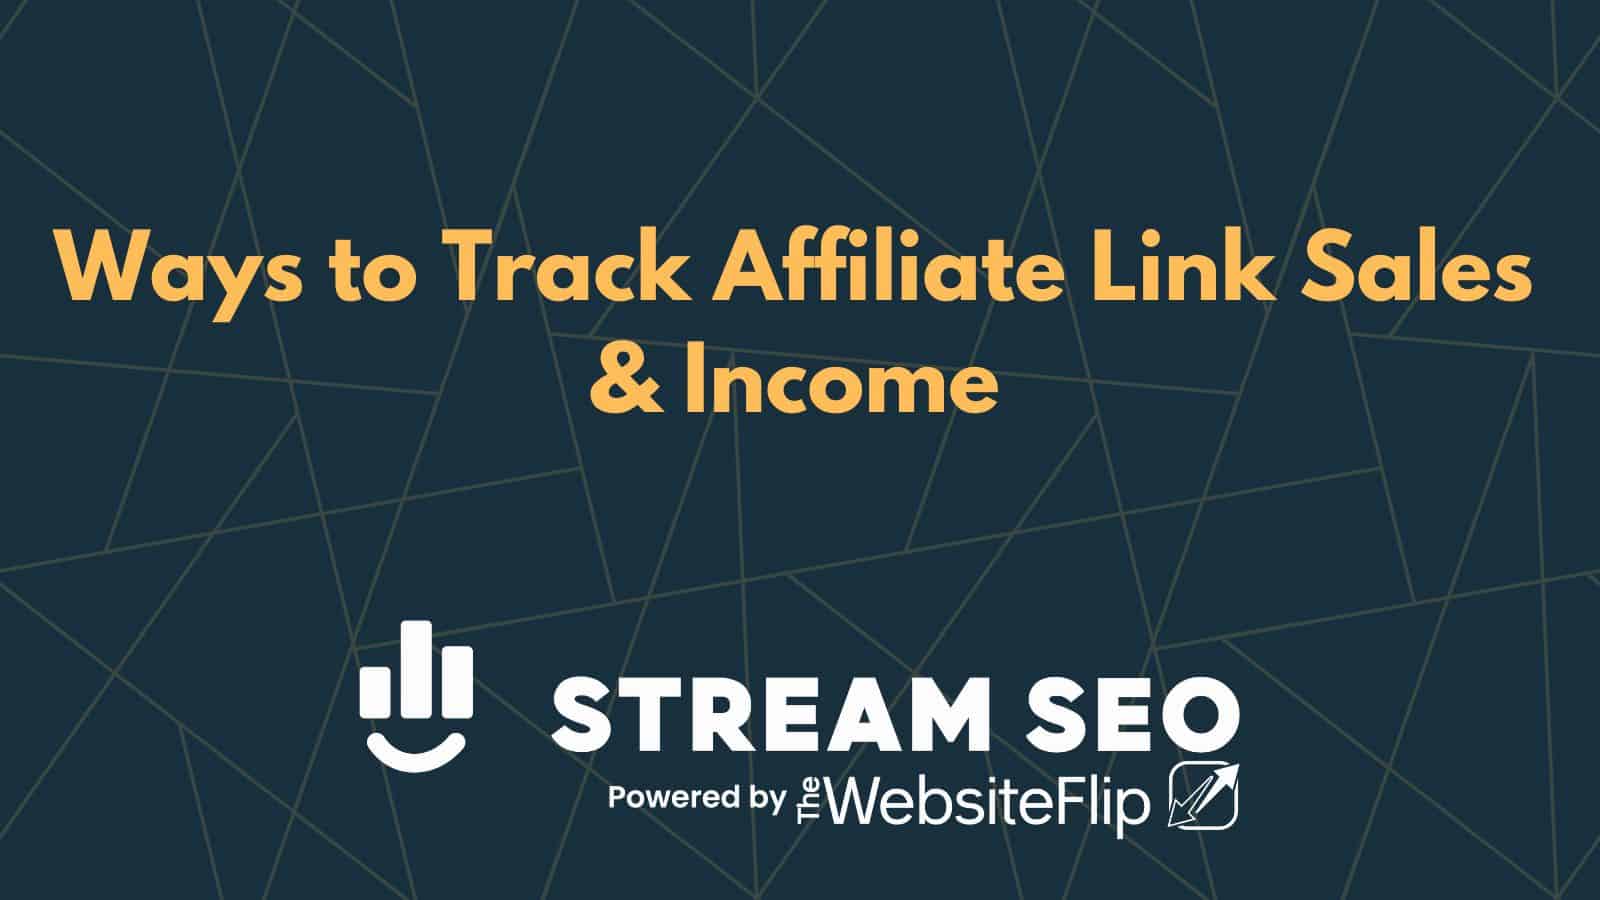 2 Ways to Track Affiliate Link Sales & Income